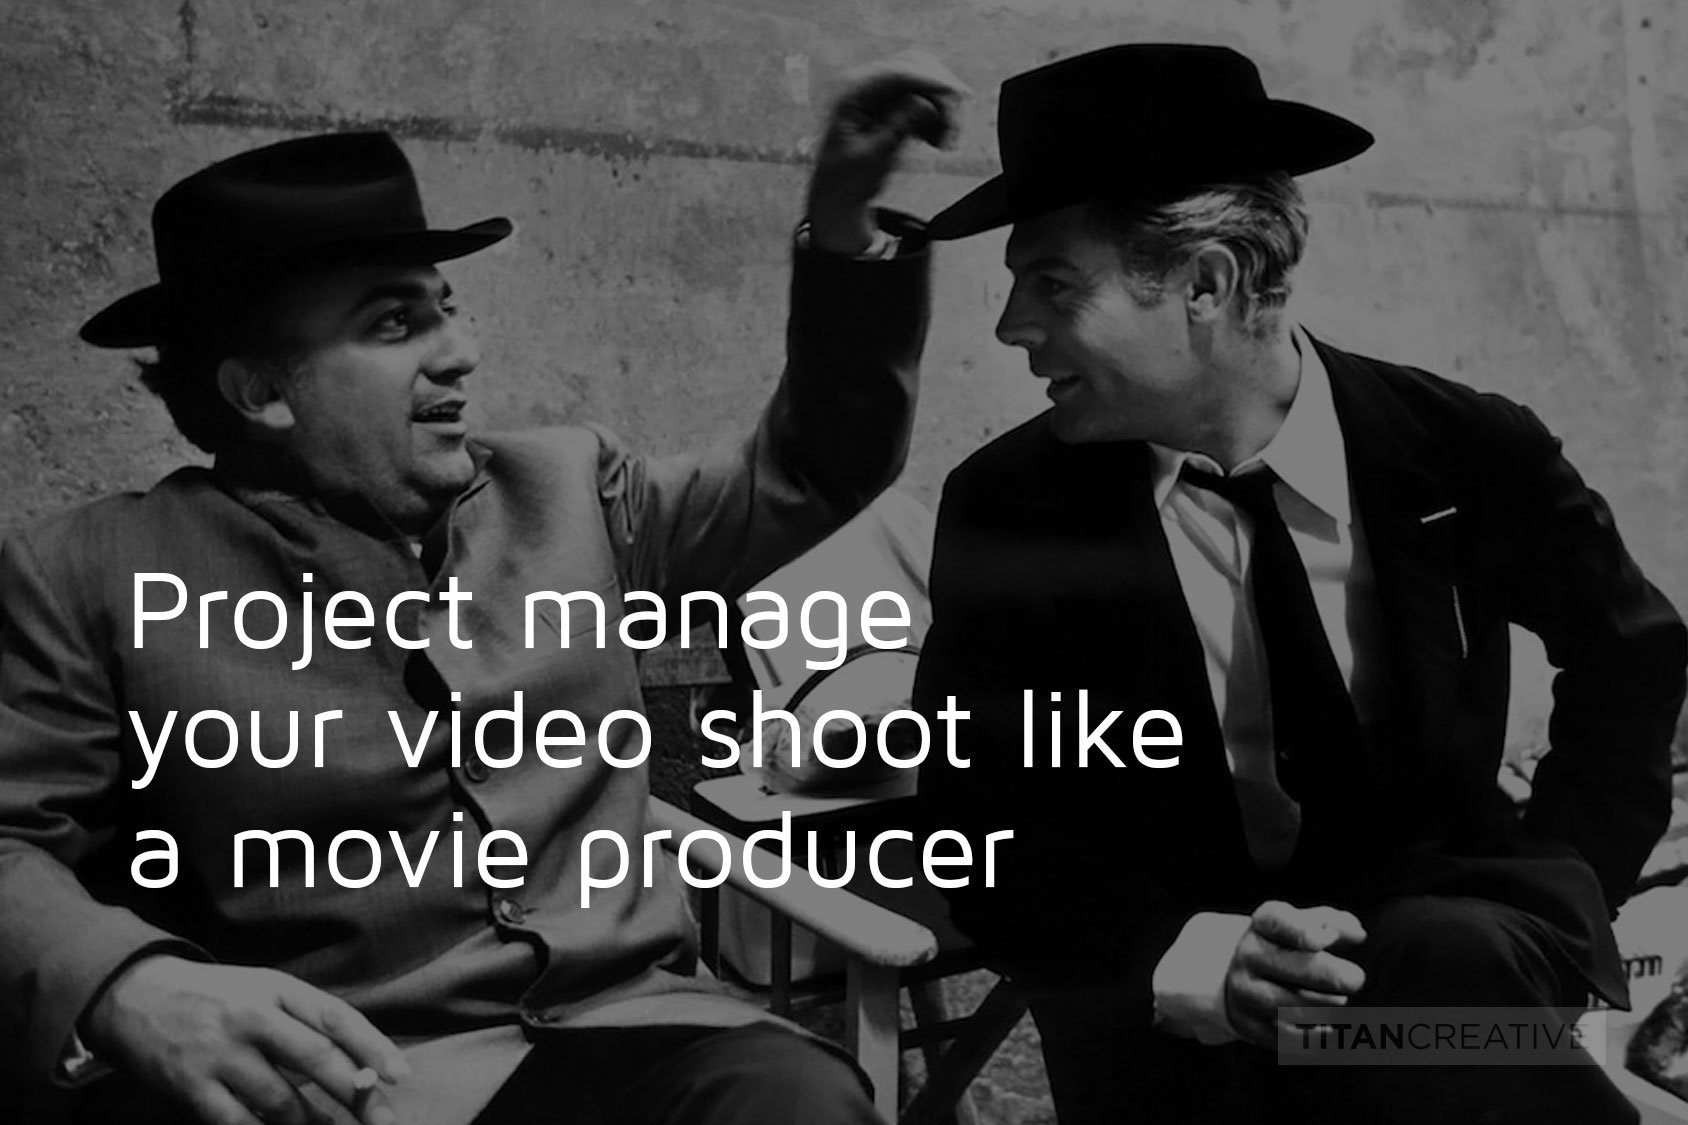 Project manage your video shoot like a movie producer